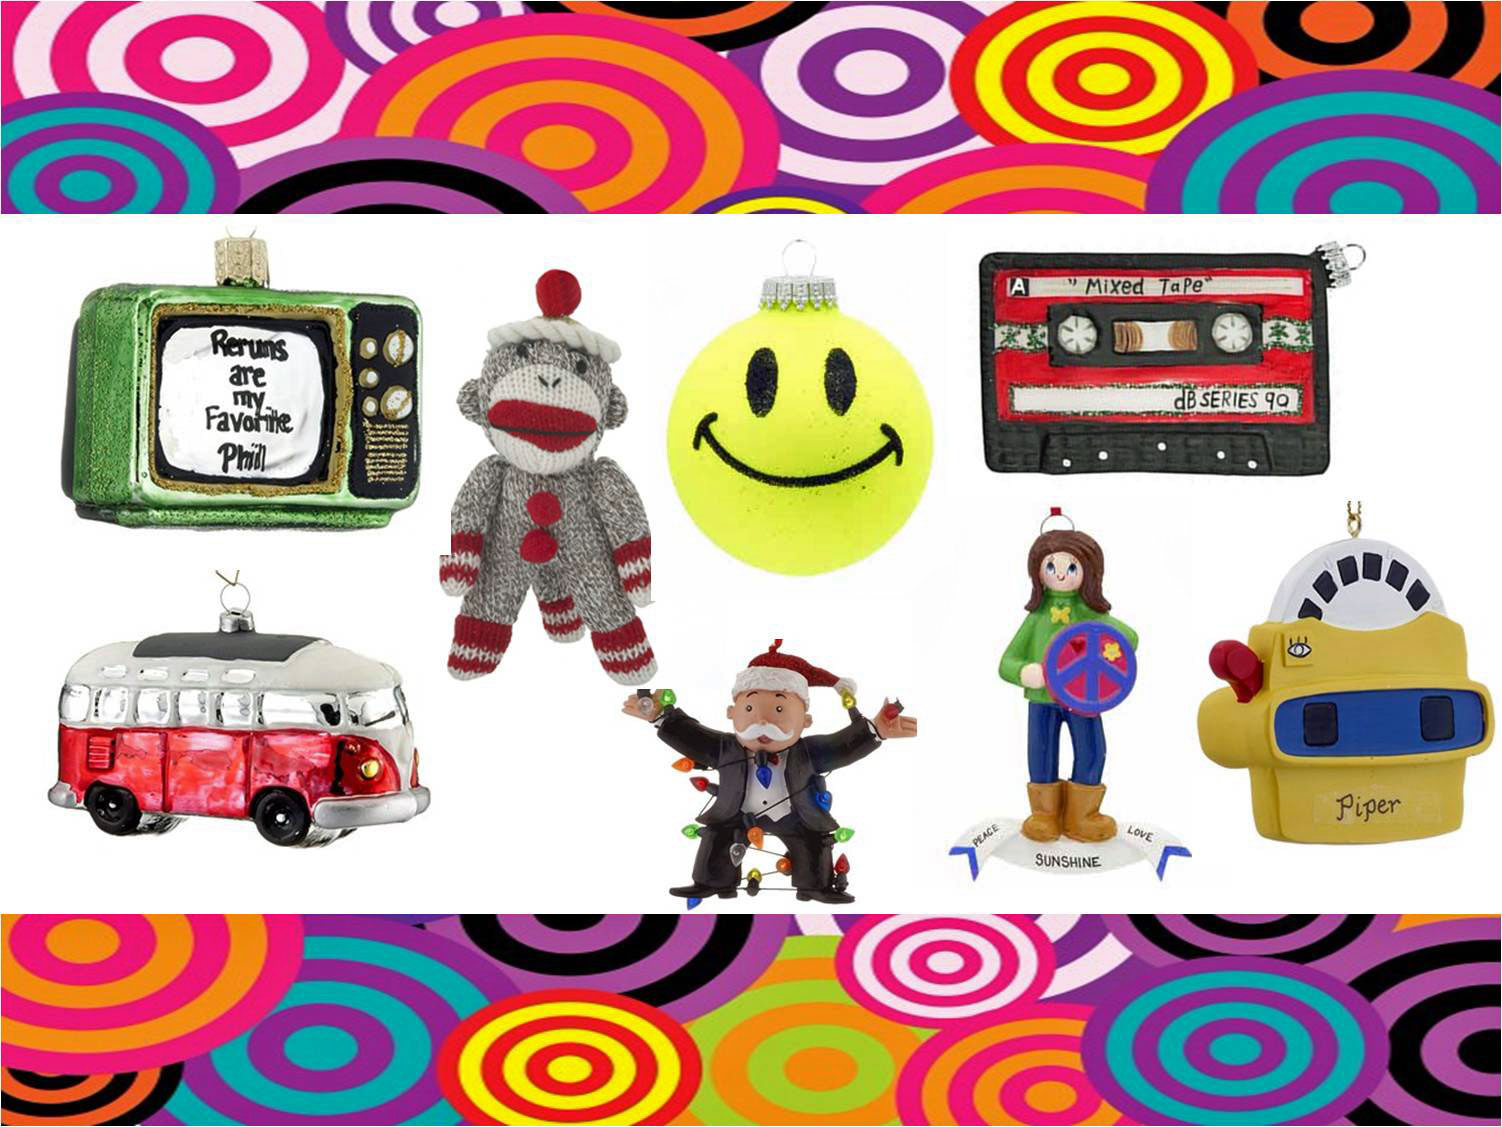 A collage of nostalgic ornaments that will remind you of the days when Chia Pets were popular, including a sock monkey, the original smiley face, and Mr. Monopoly. | OrnamentShop.com